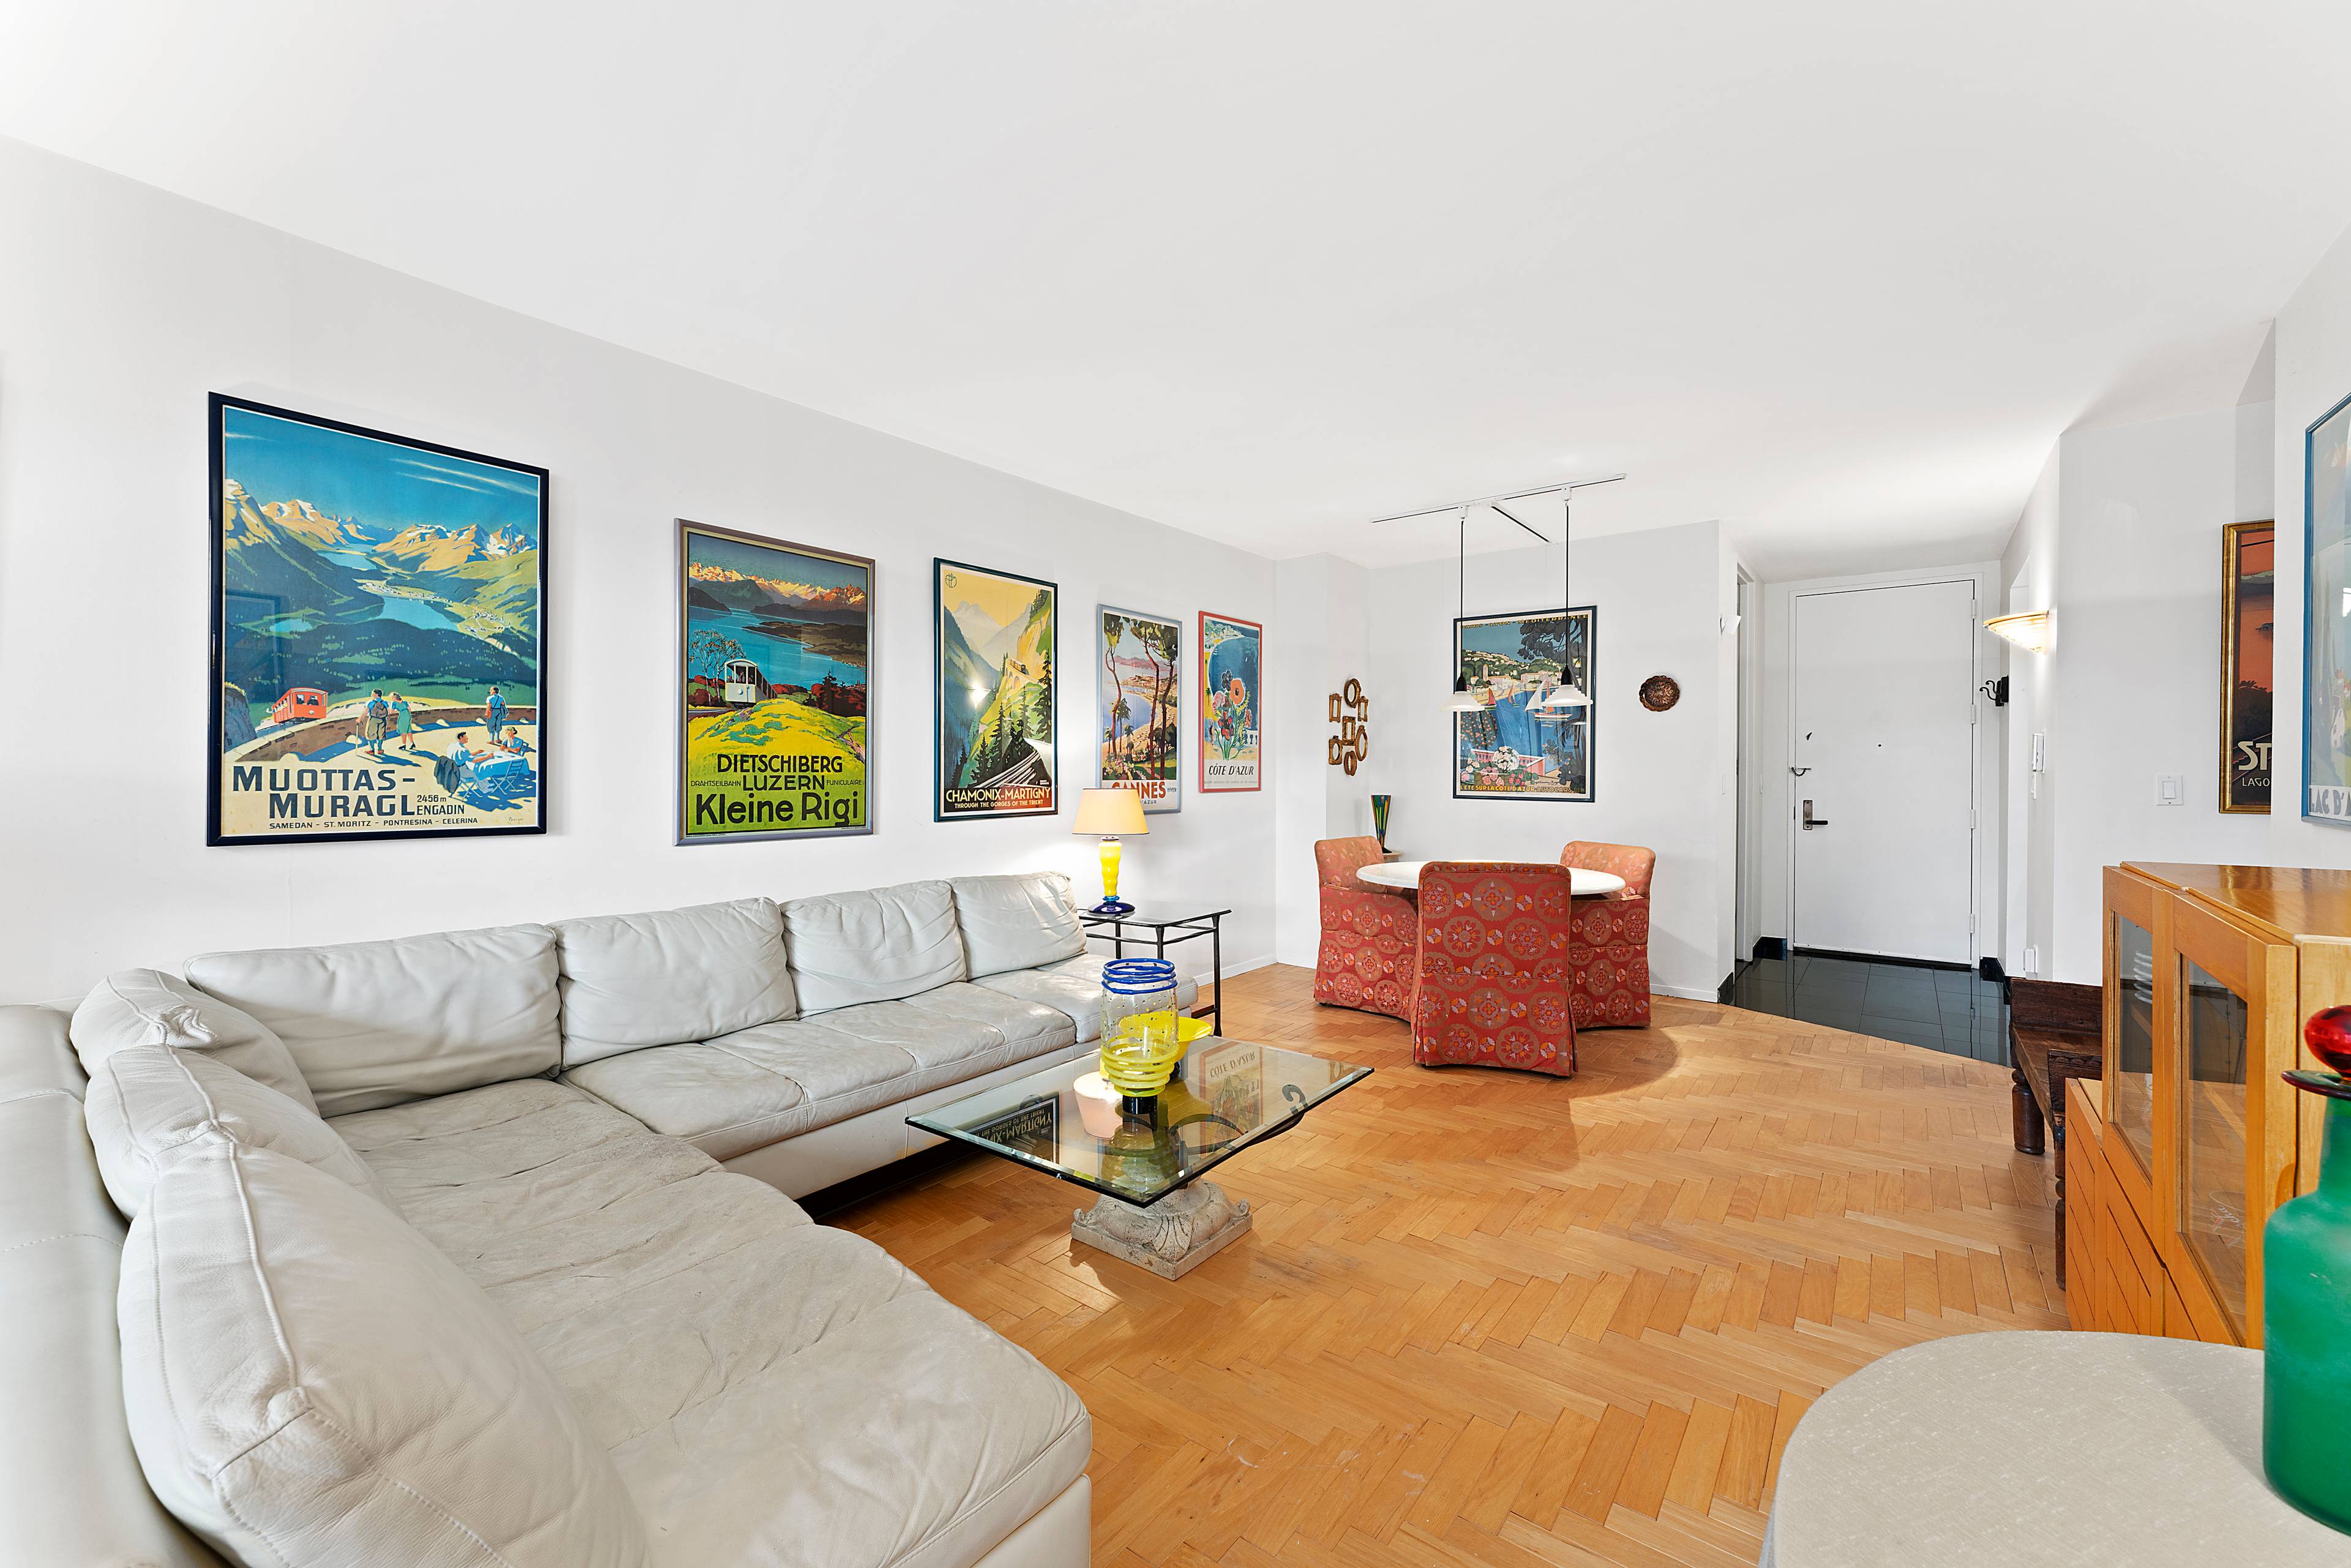 The best of Upper East Side living awaits in this expansive two bedroom, two bathroom home featuring spectacular natural light, updated interiors and private outdoor space in a sought after ...